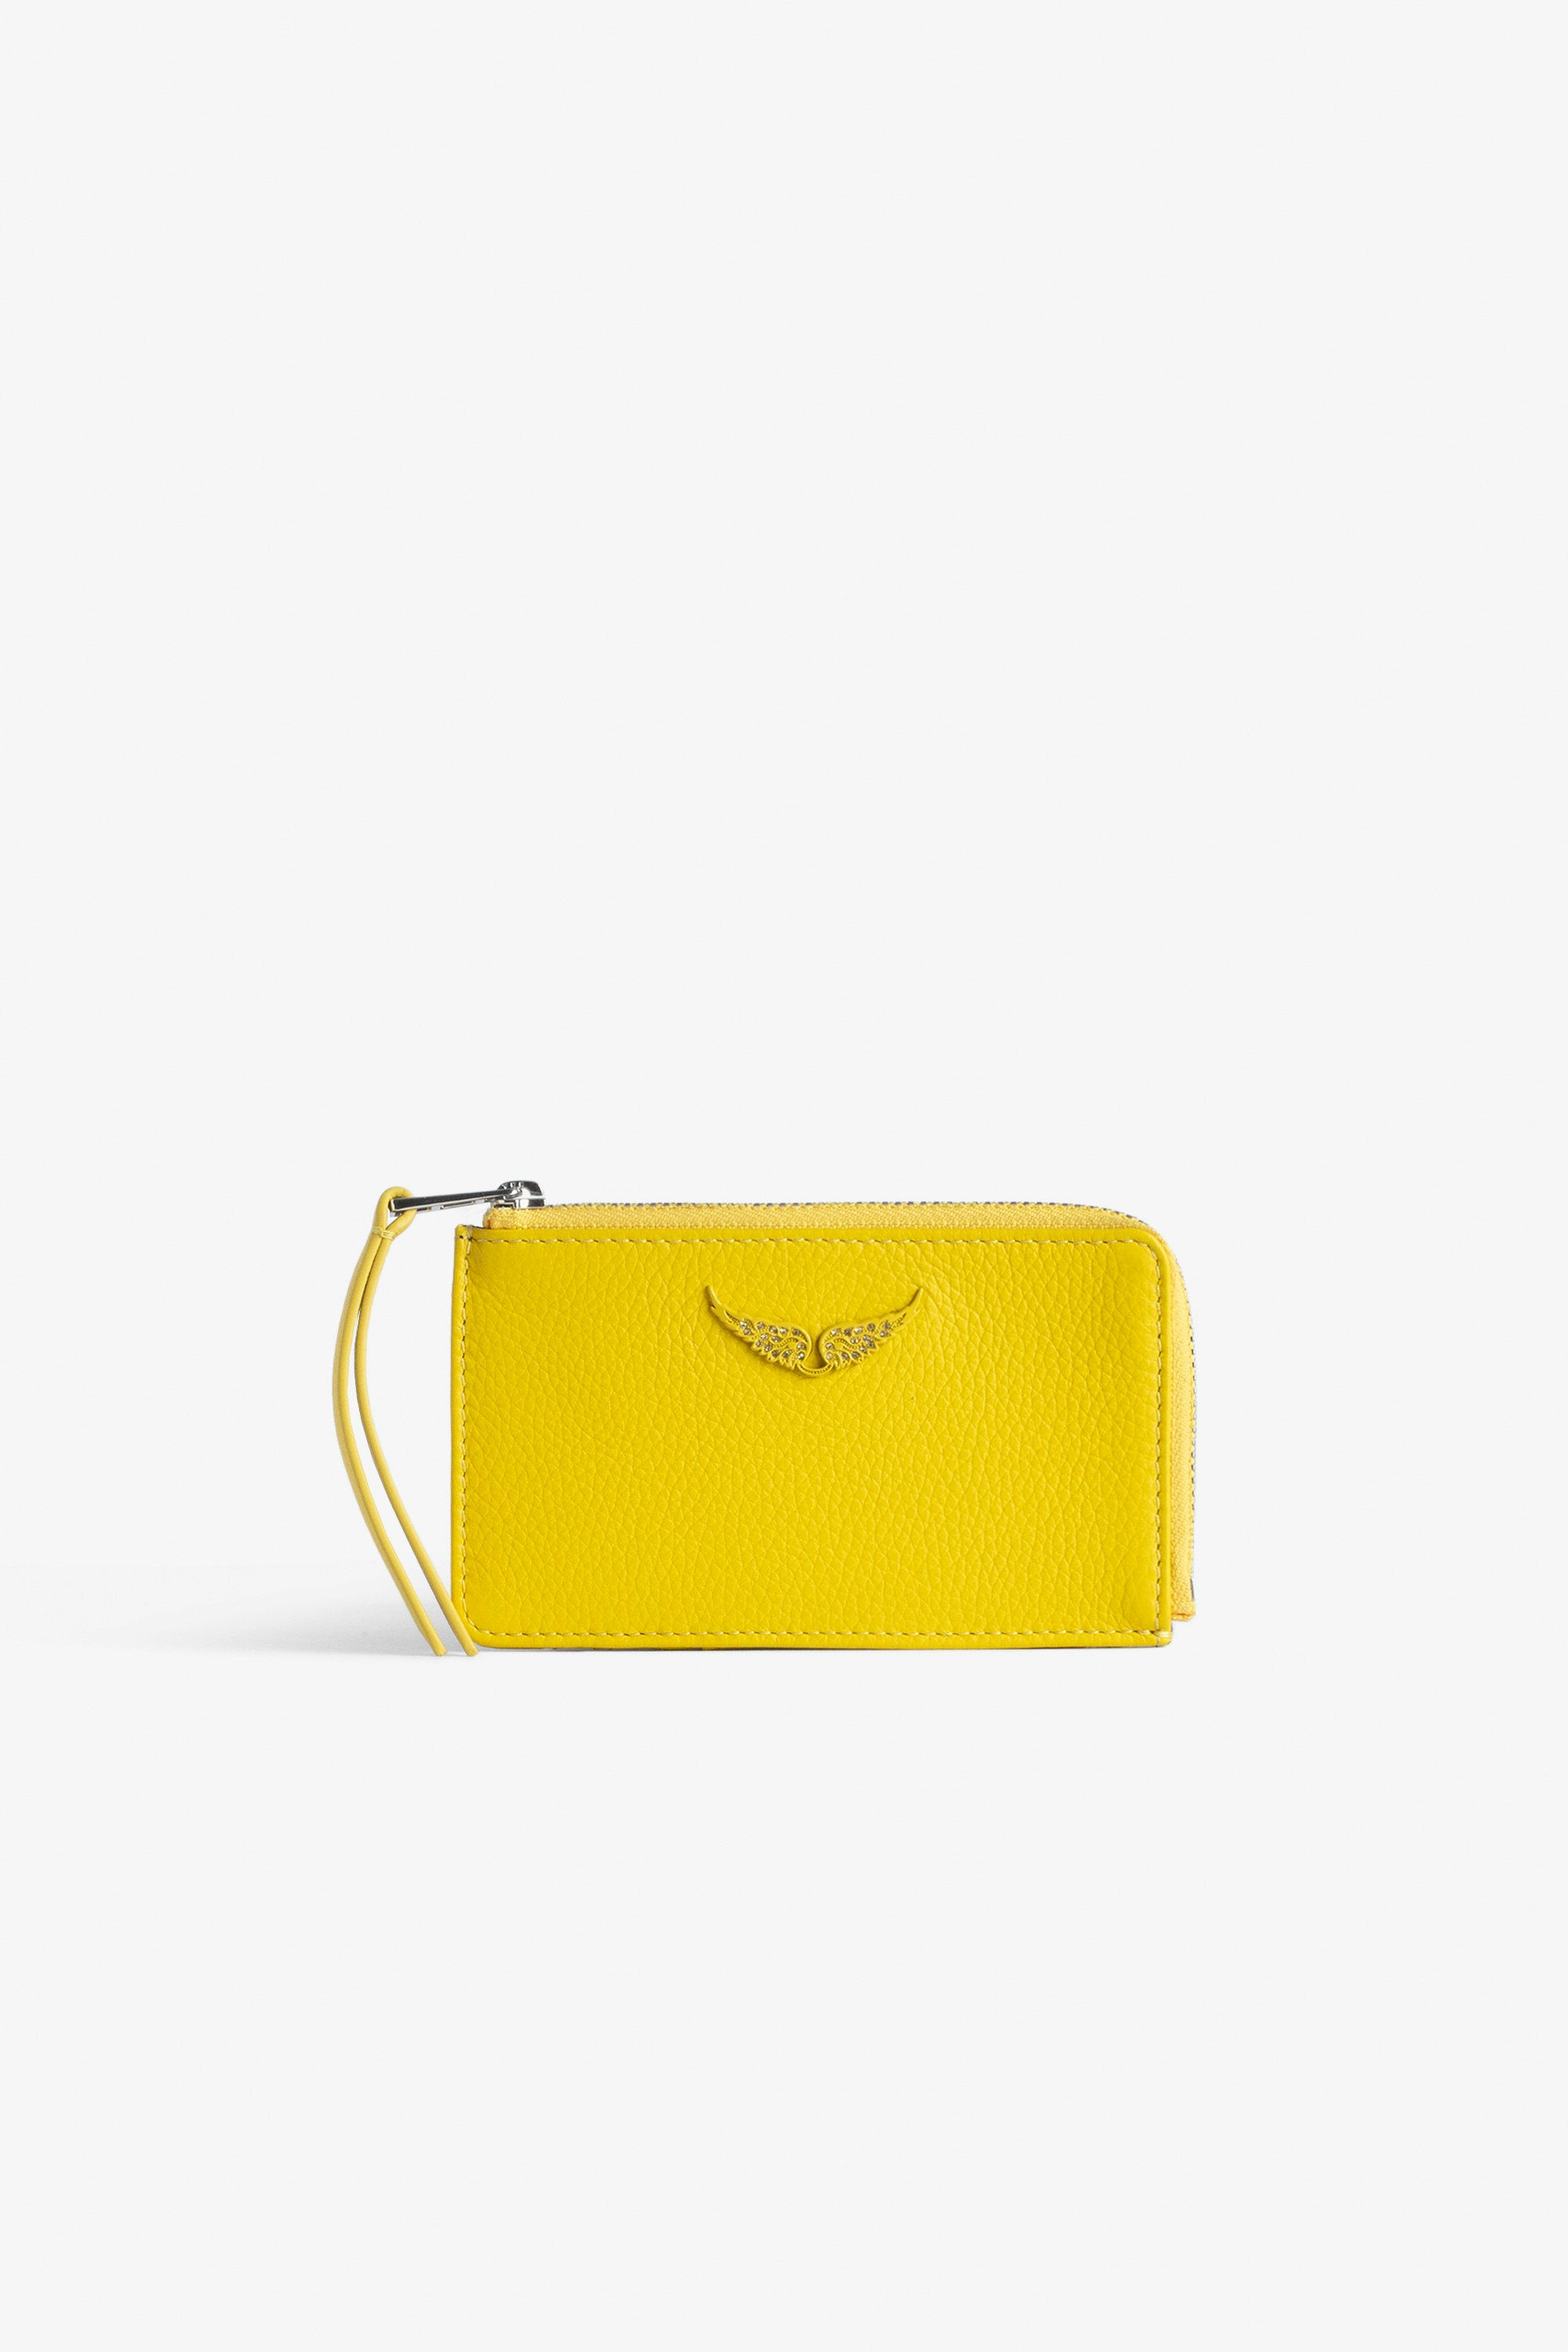 ZV Card 財布 Women’s yellow grained leather card holder with wings charm.